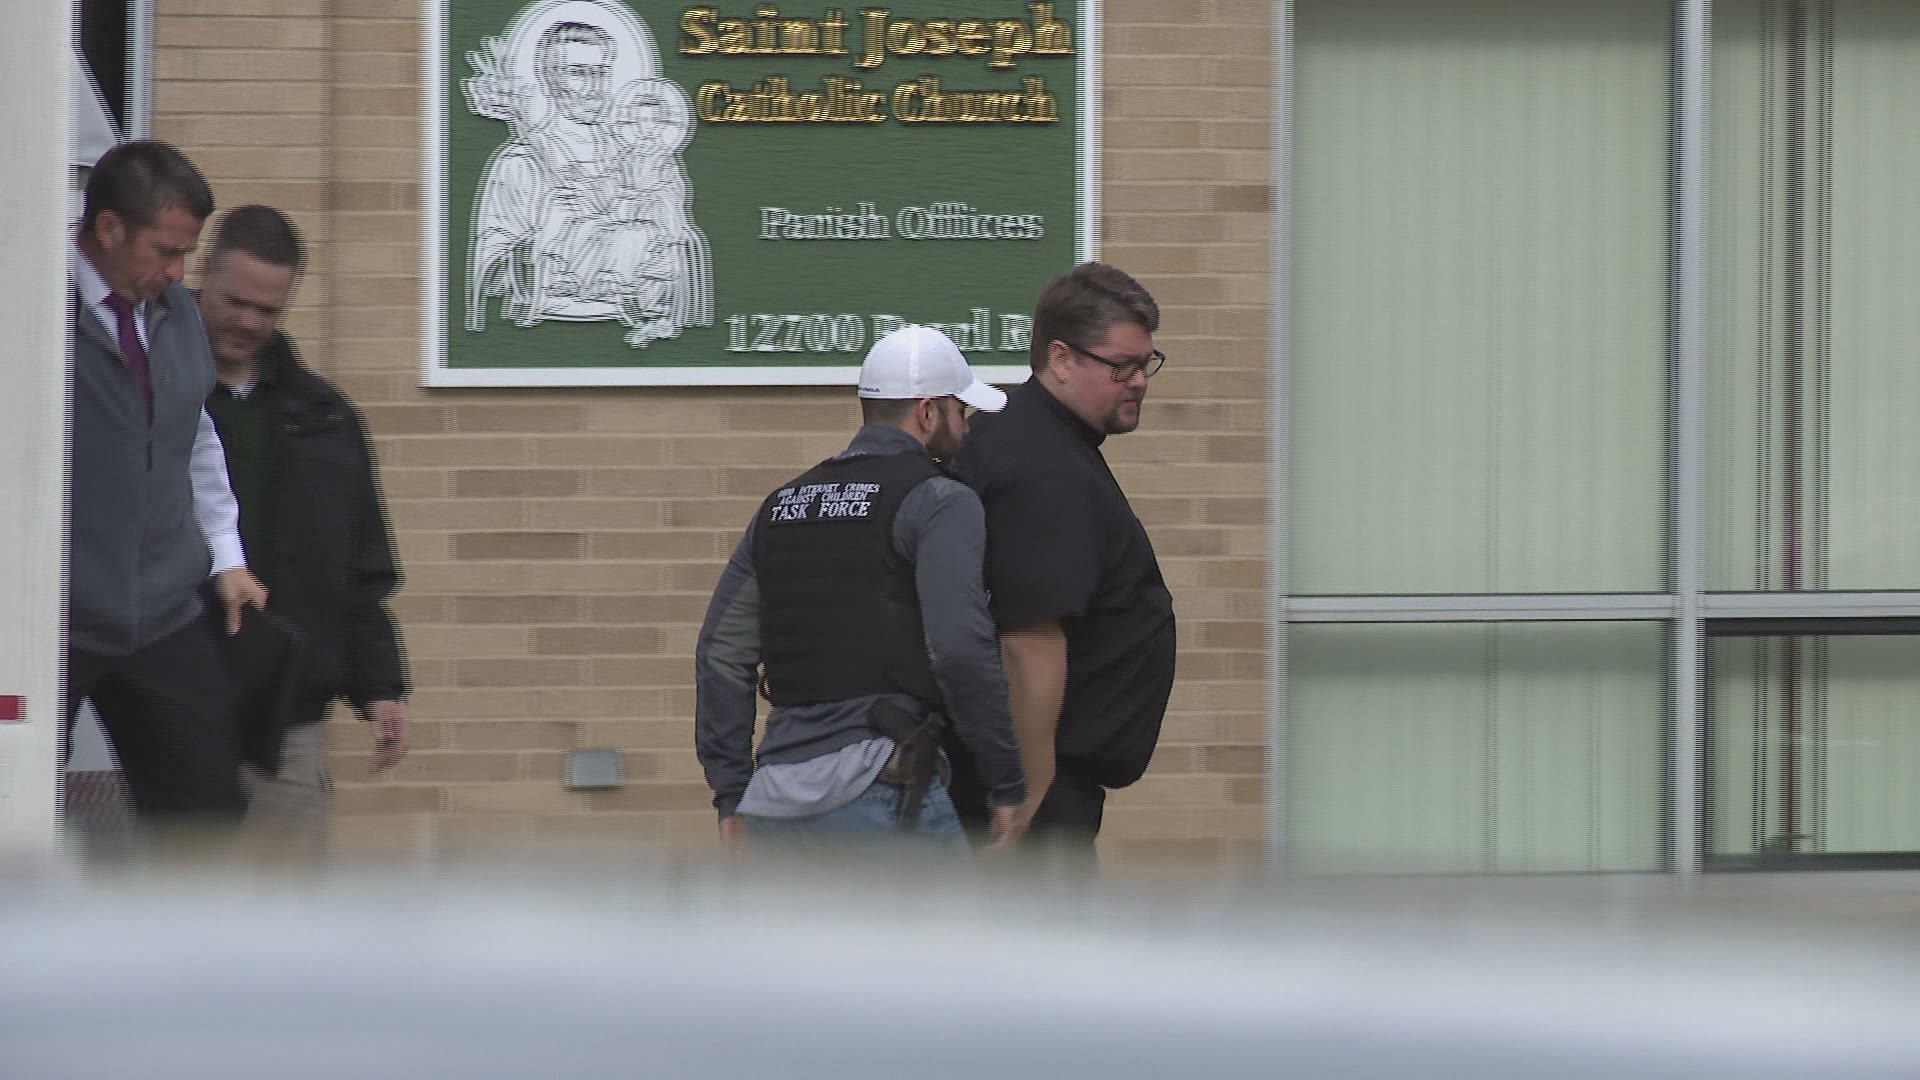 A Strongsville area priest was arrested at St. Joseph Catholic Church in connection to a child pornography case.